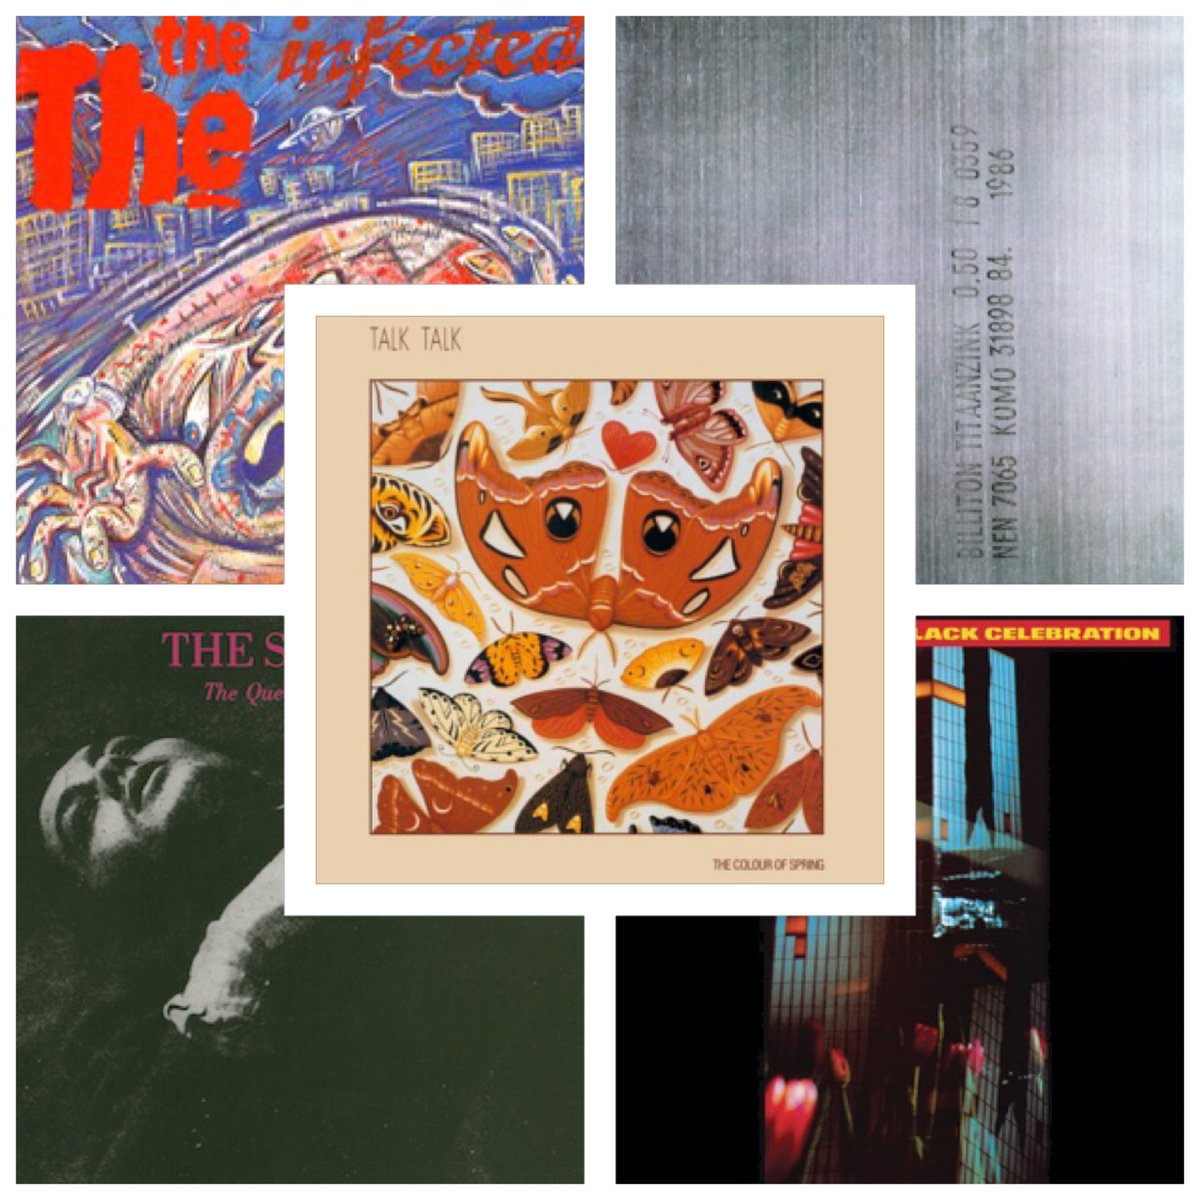 @RichardS7370 Thanks Rich 🤝

My #5albums86 are:

1: Talk Talk - Colour of Spring (5 pts)
2: The The - Infected
3: New Order - Brotherhood
4: Smiths - Queen is Dead
5: Depeche Mode - Black Celebration